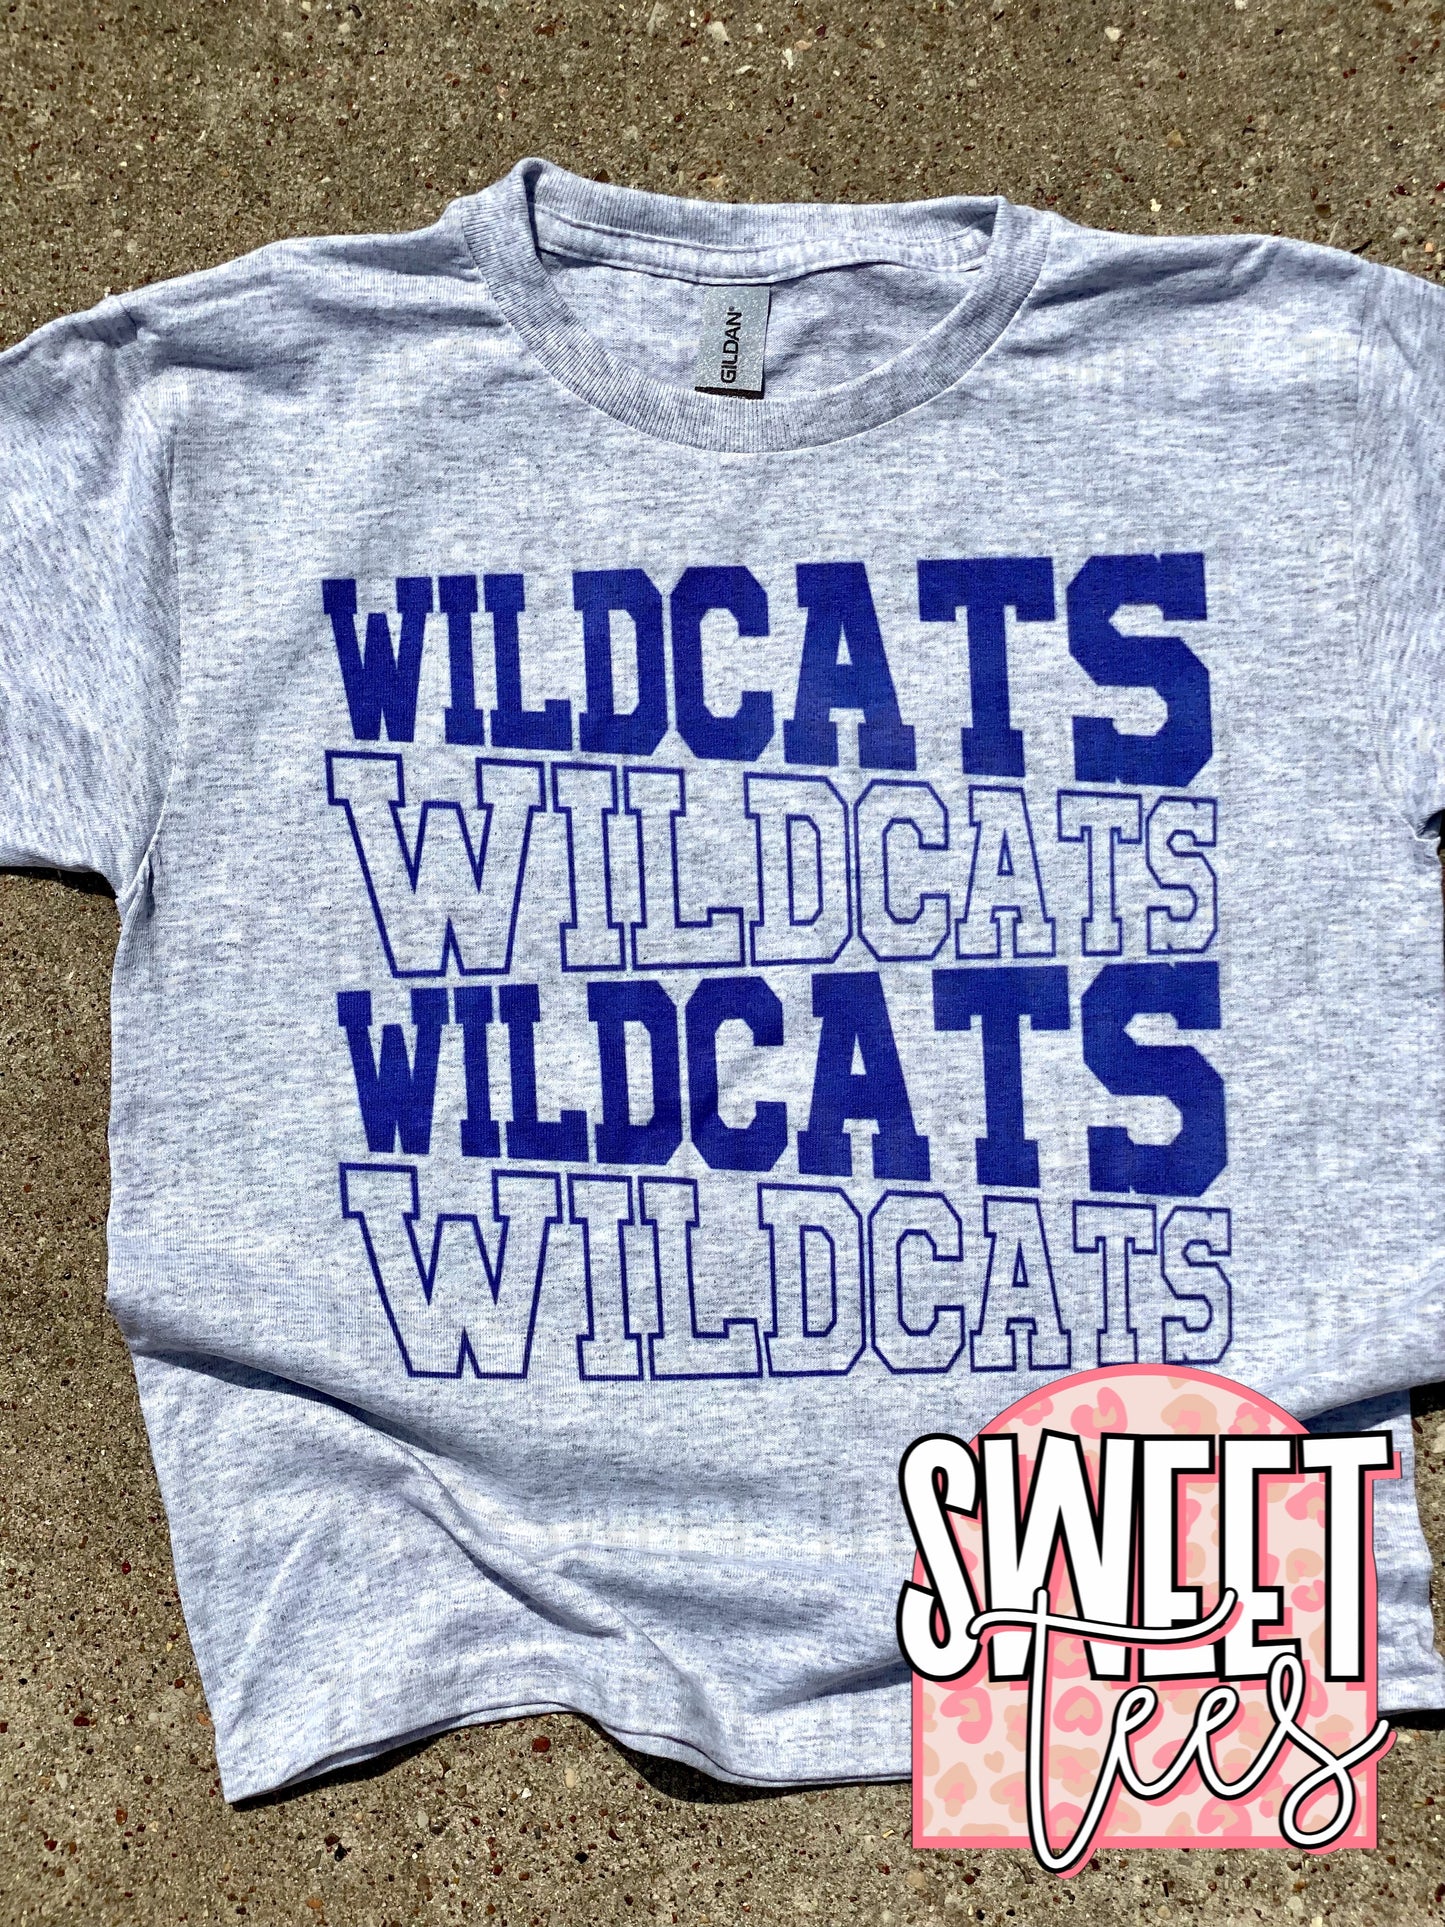 Big Sandy Wildcats In and Out - gray tee